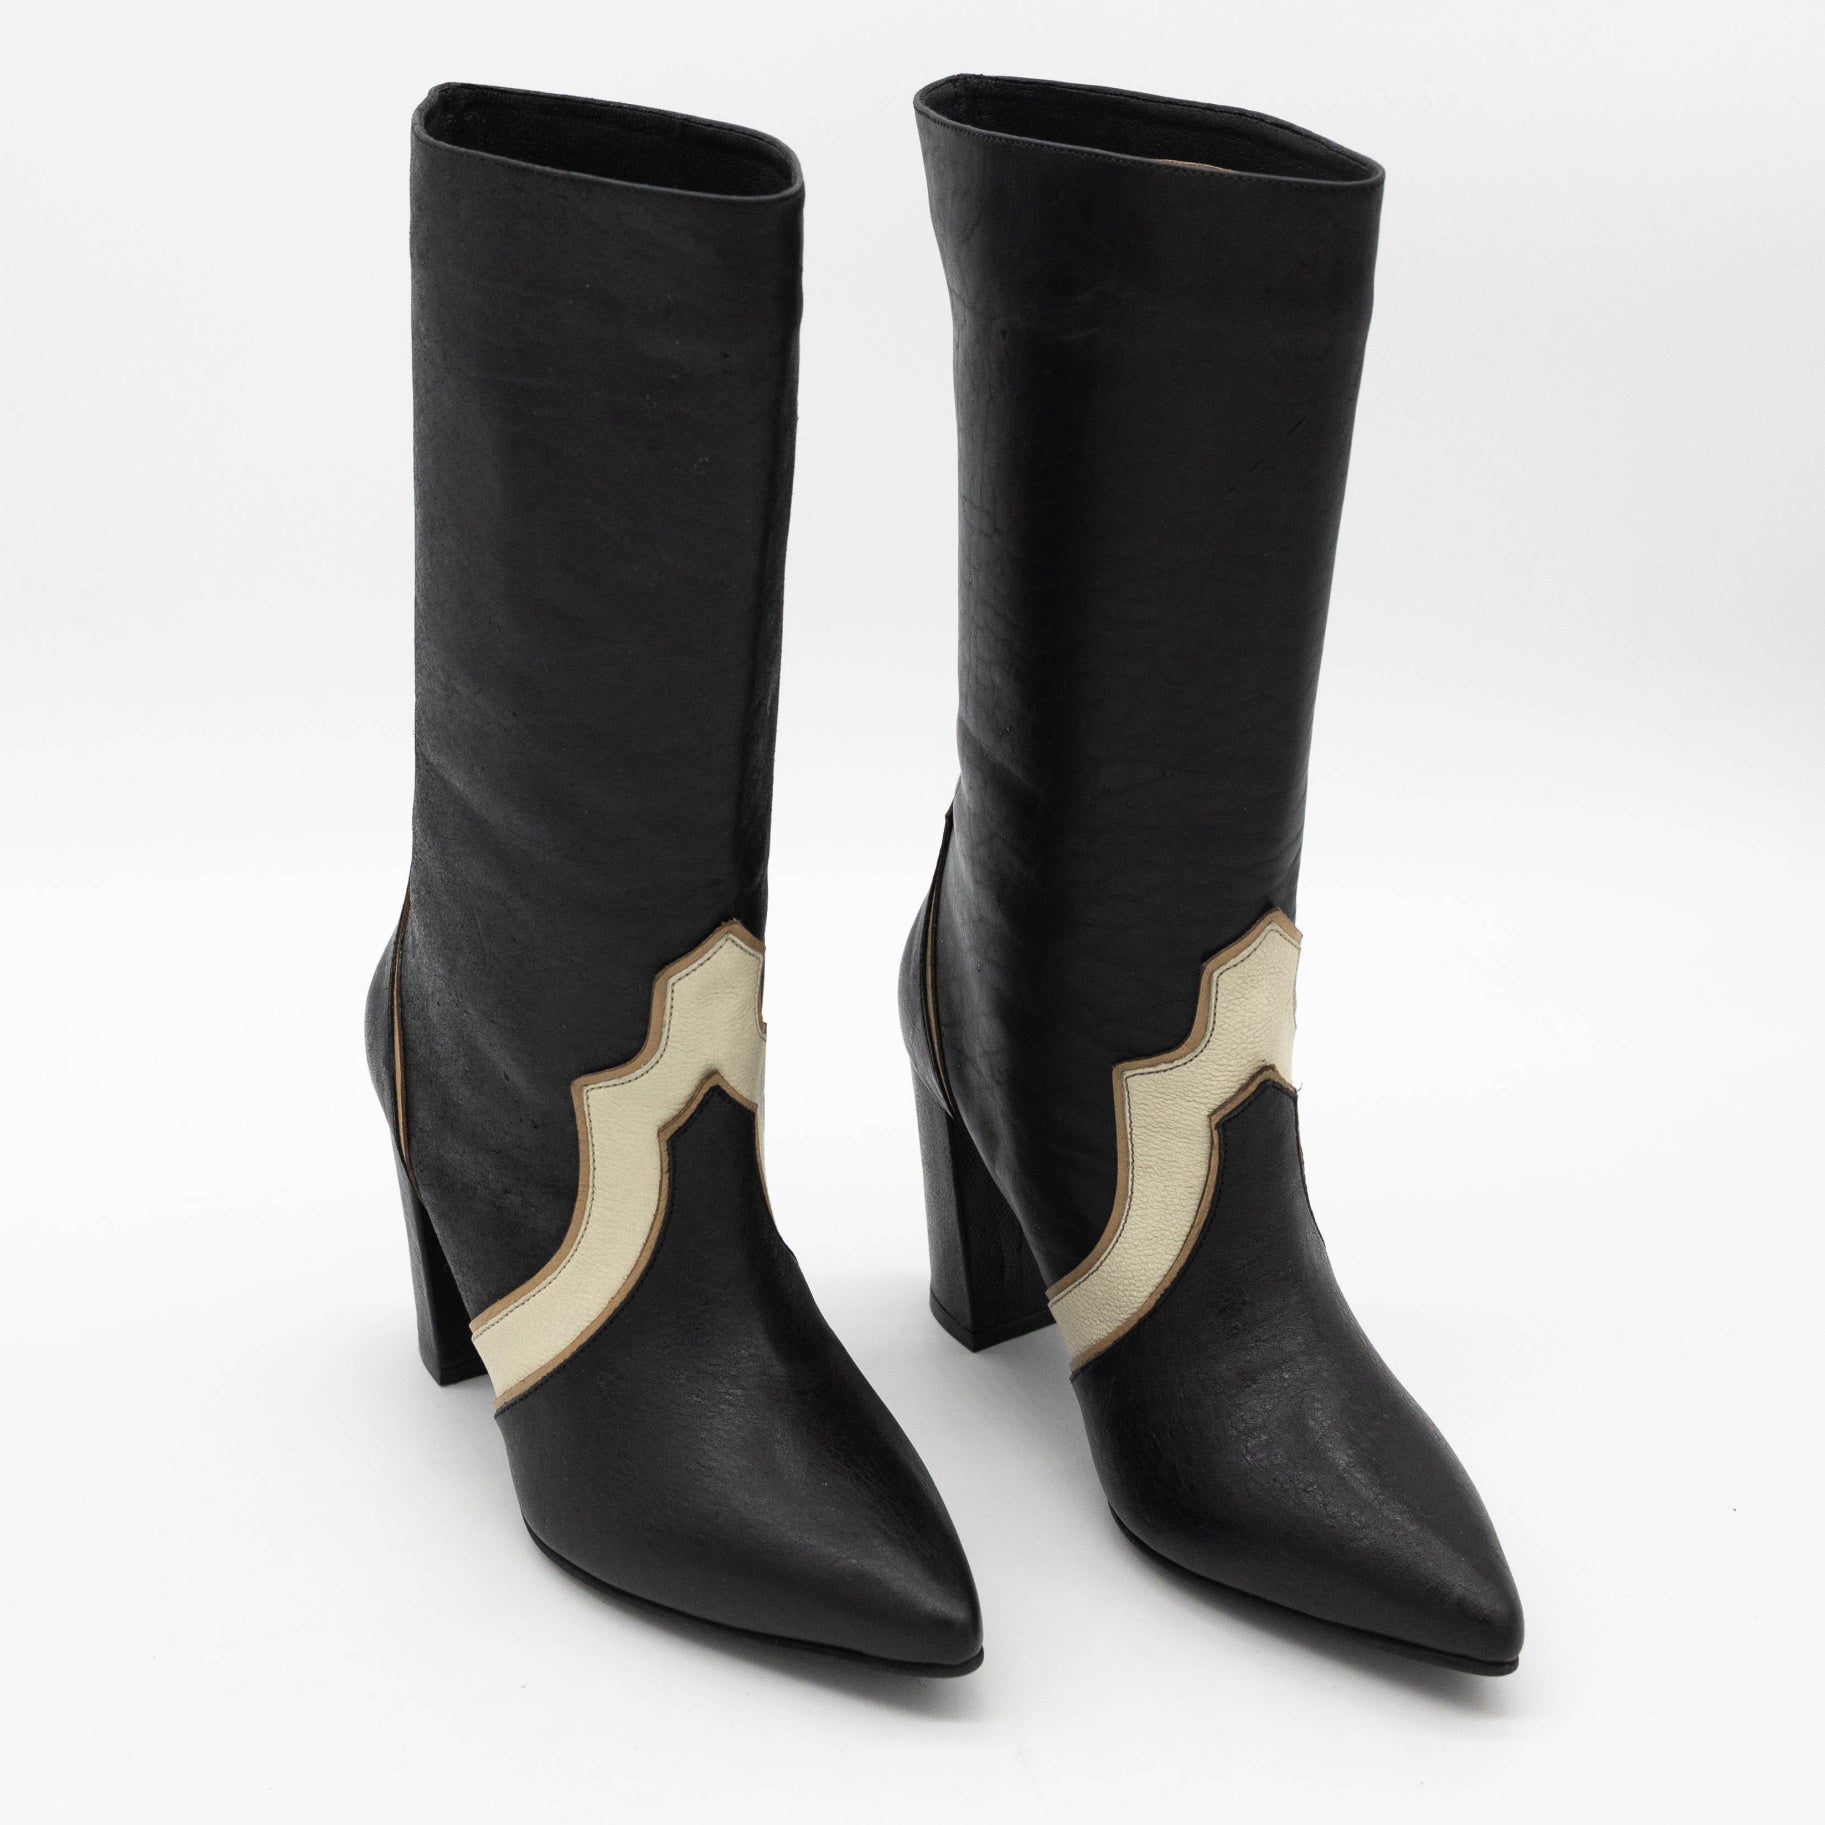 Handcrafted Leather Western Inspired Boots With Heel, Black Smooth Leather, Ivory White Smooth Leather and Tan Arequipe Smooth Leather. Stivali New York